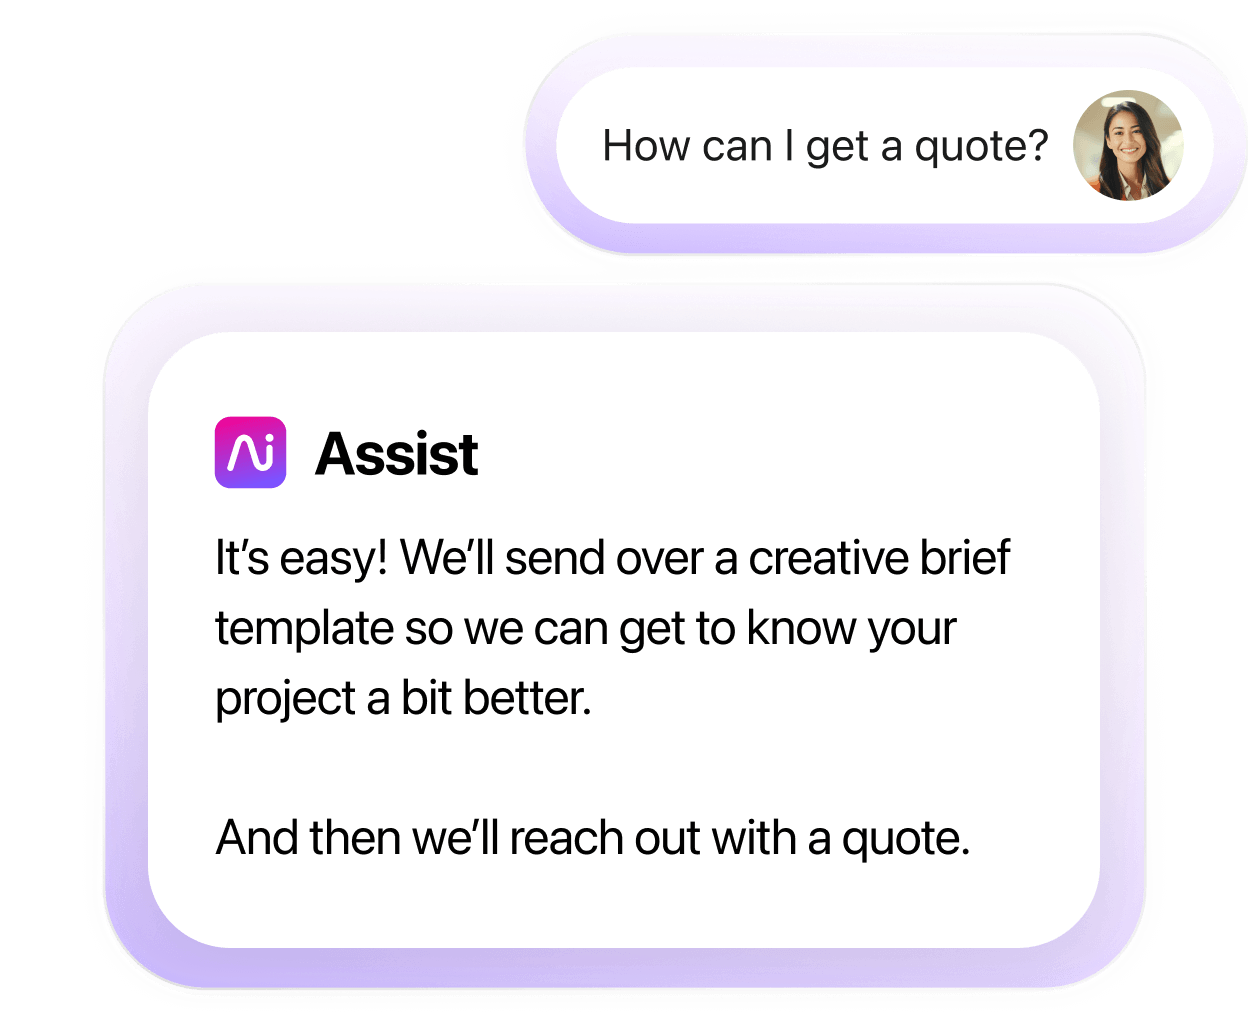 Screenshot of an inquiry from a customer about getting a quote